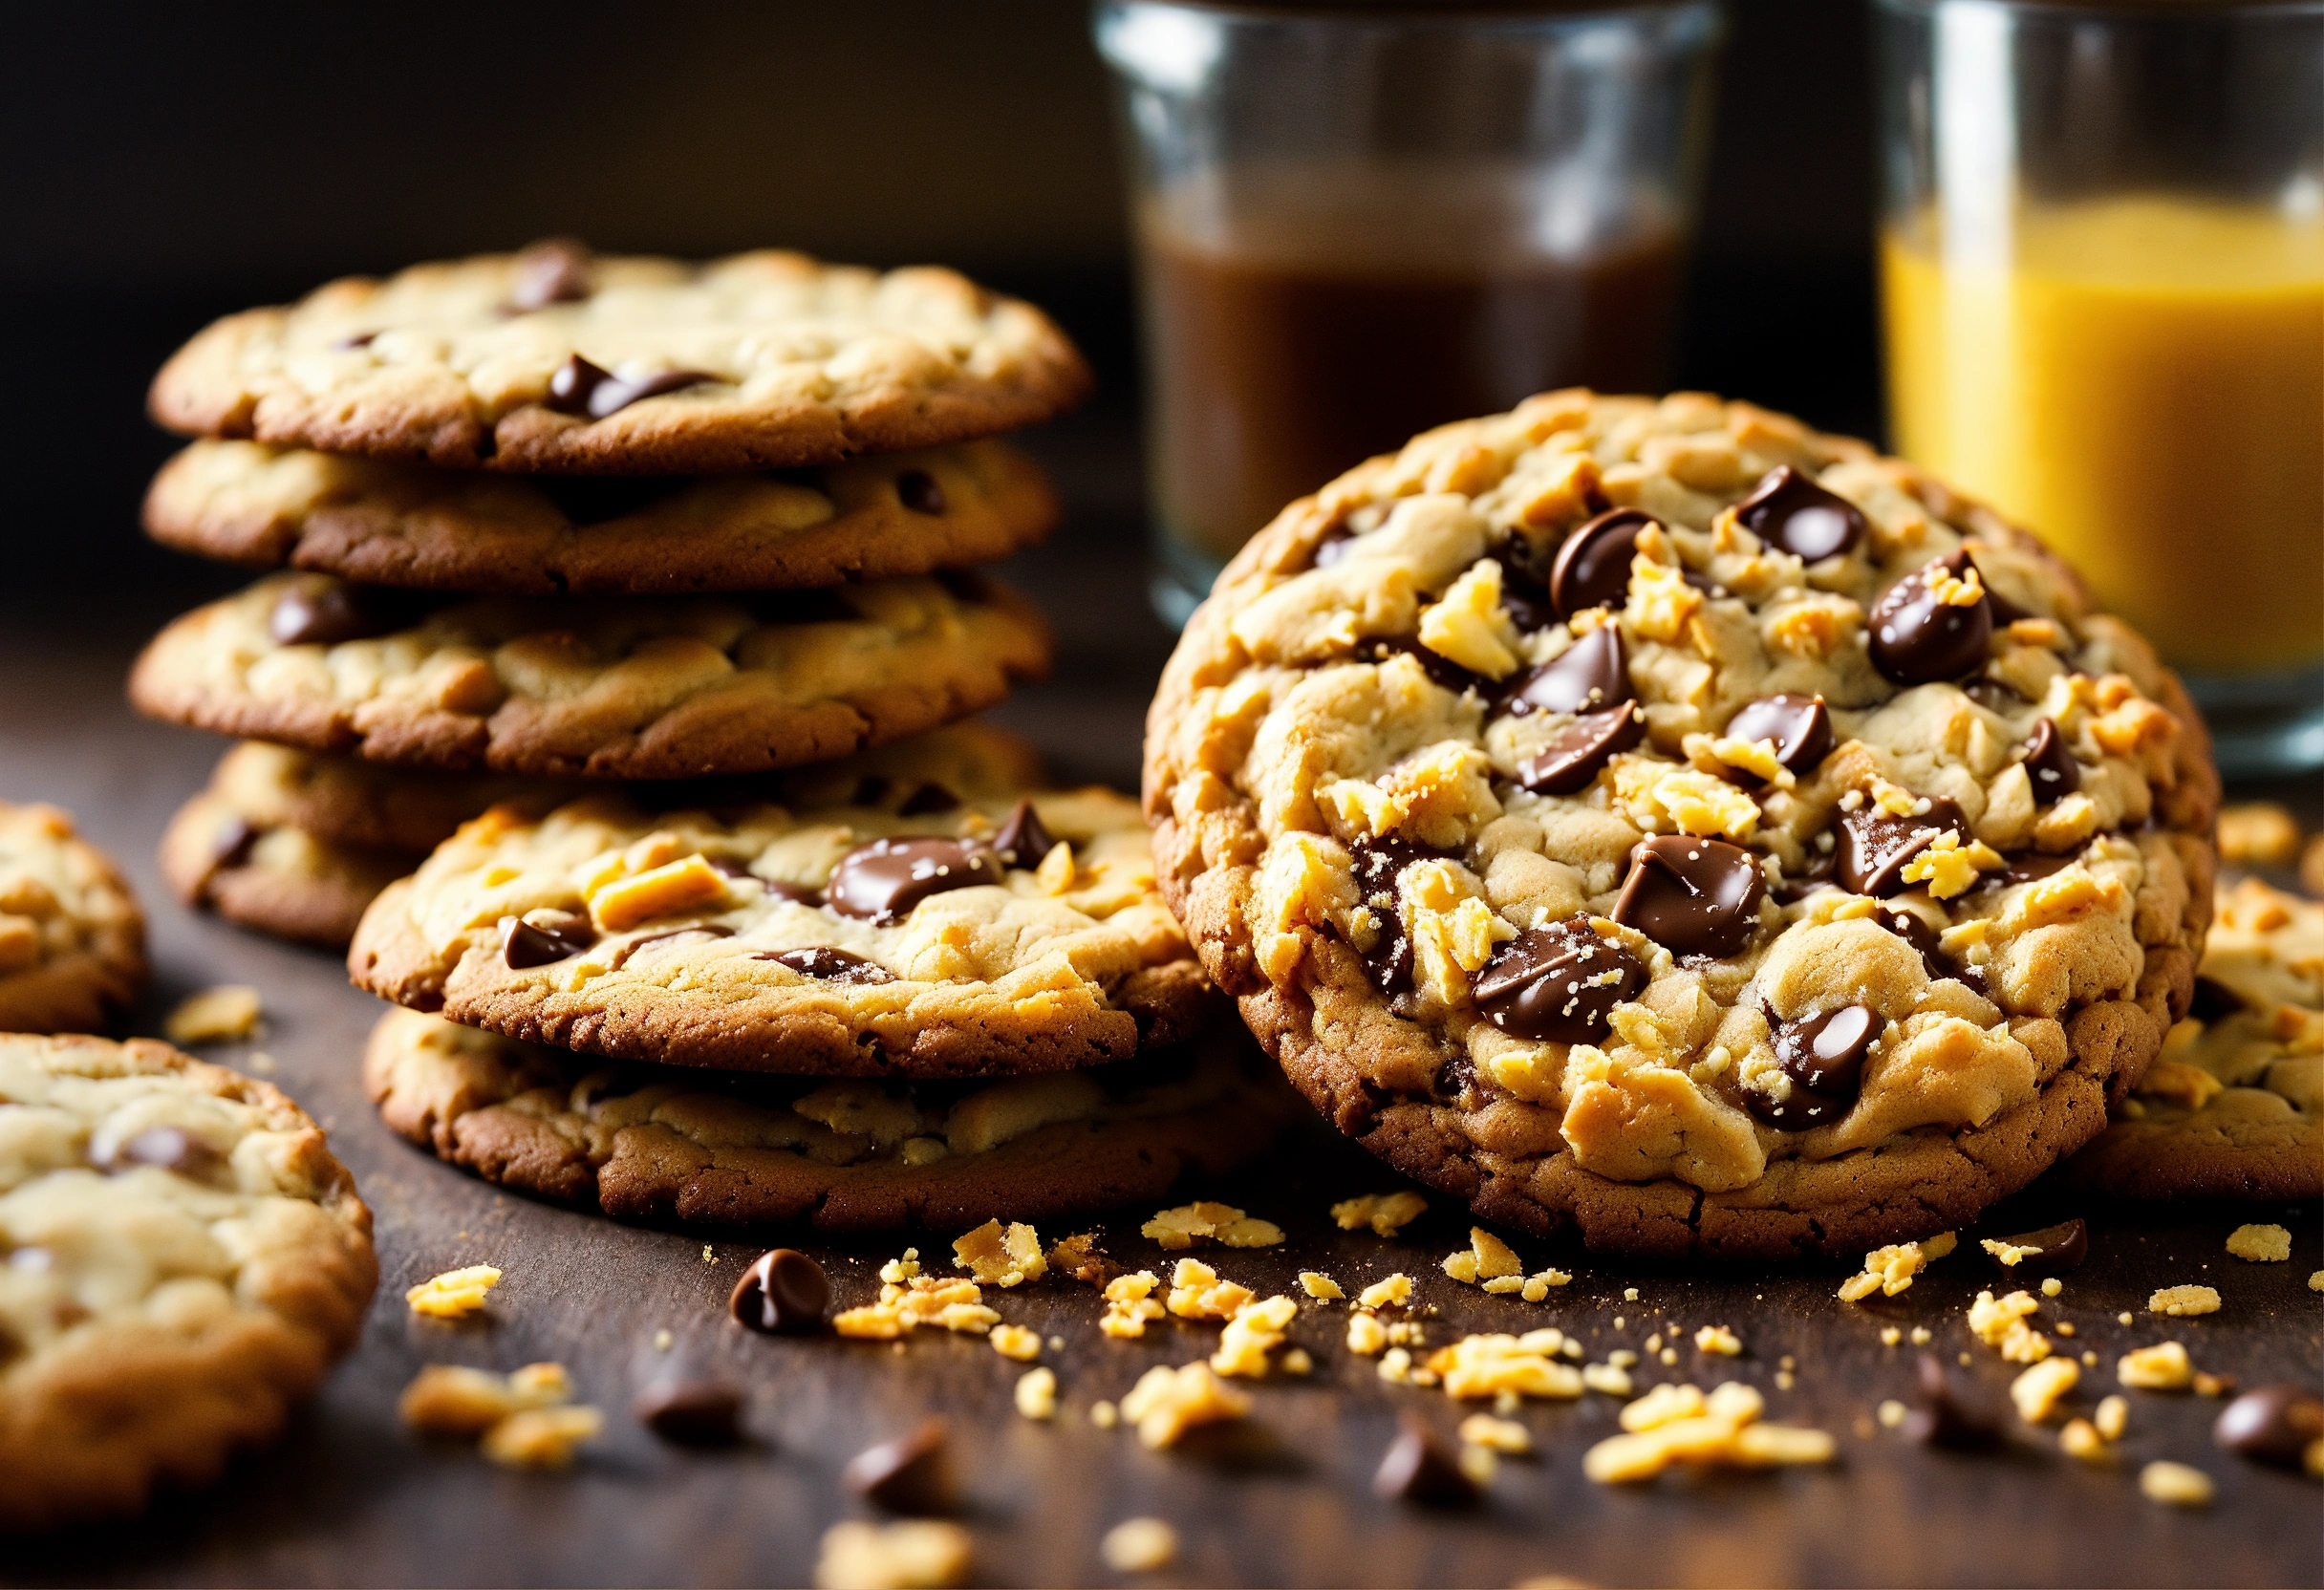 Discover the secrets to baking perfect Big & Buttery Chocolate Chip Cookies with our easy-to-follow guide. Indulge in homemade cookie bliss!